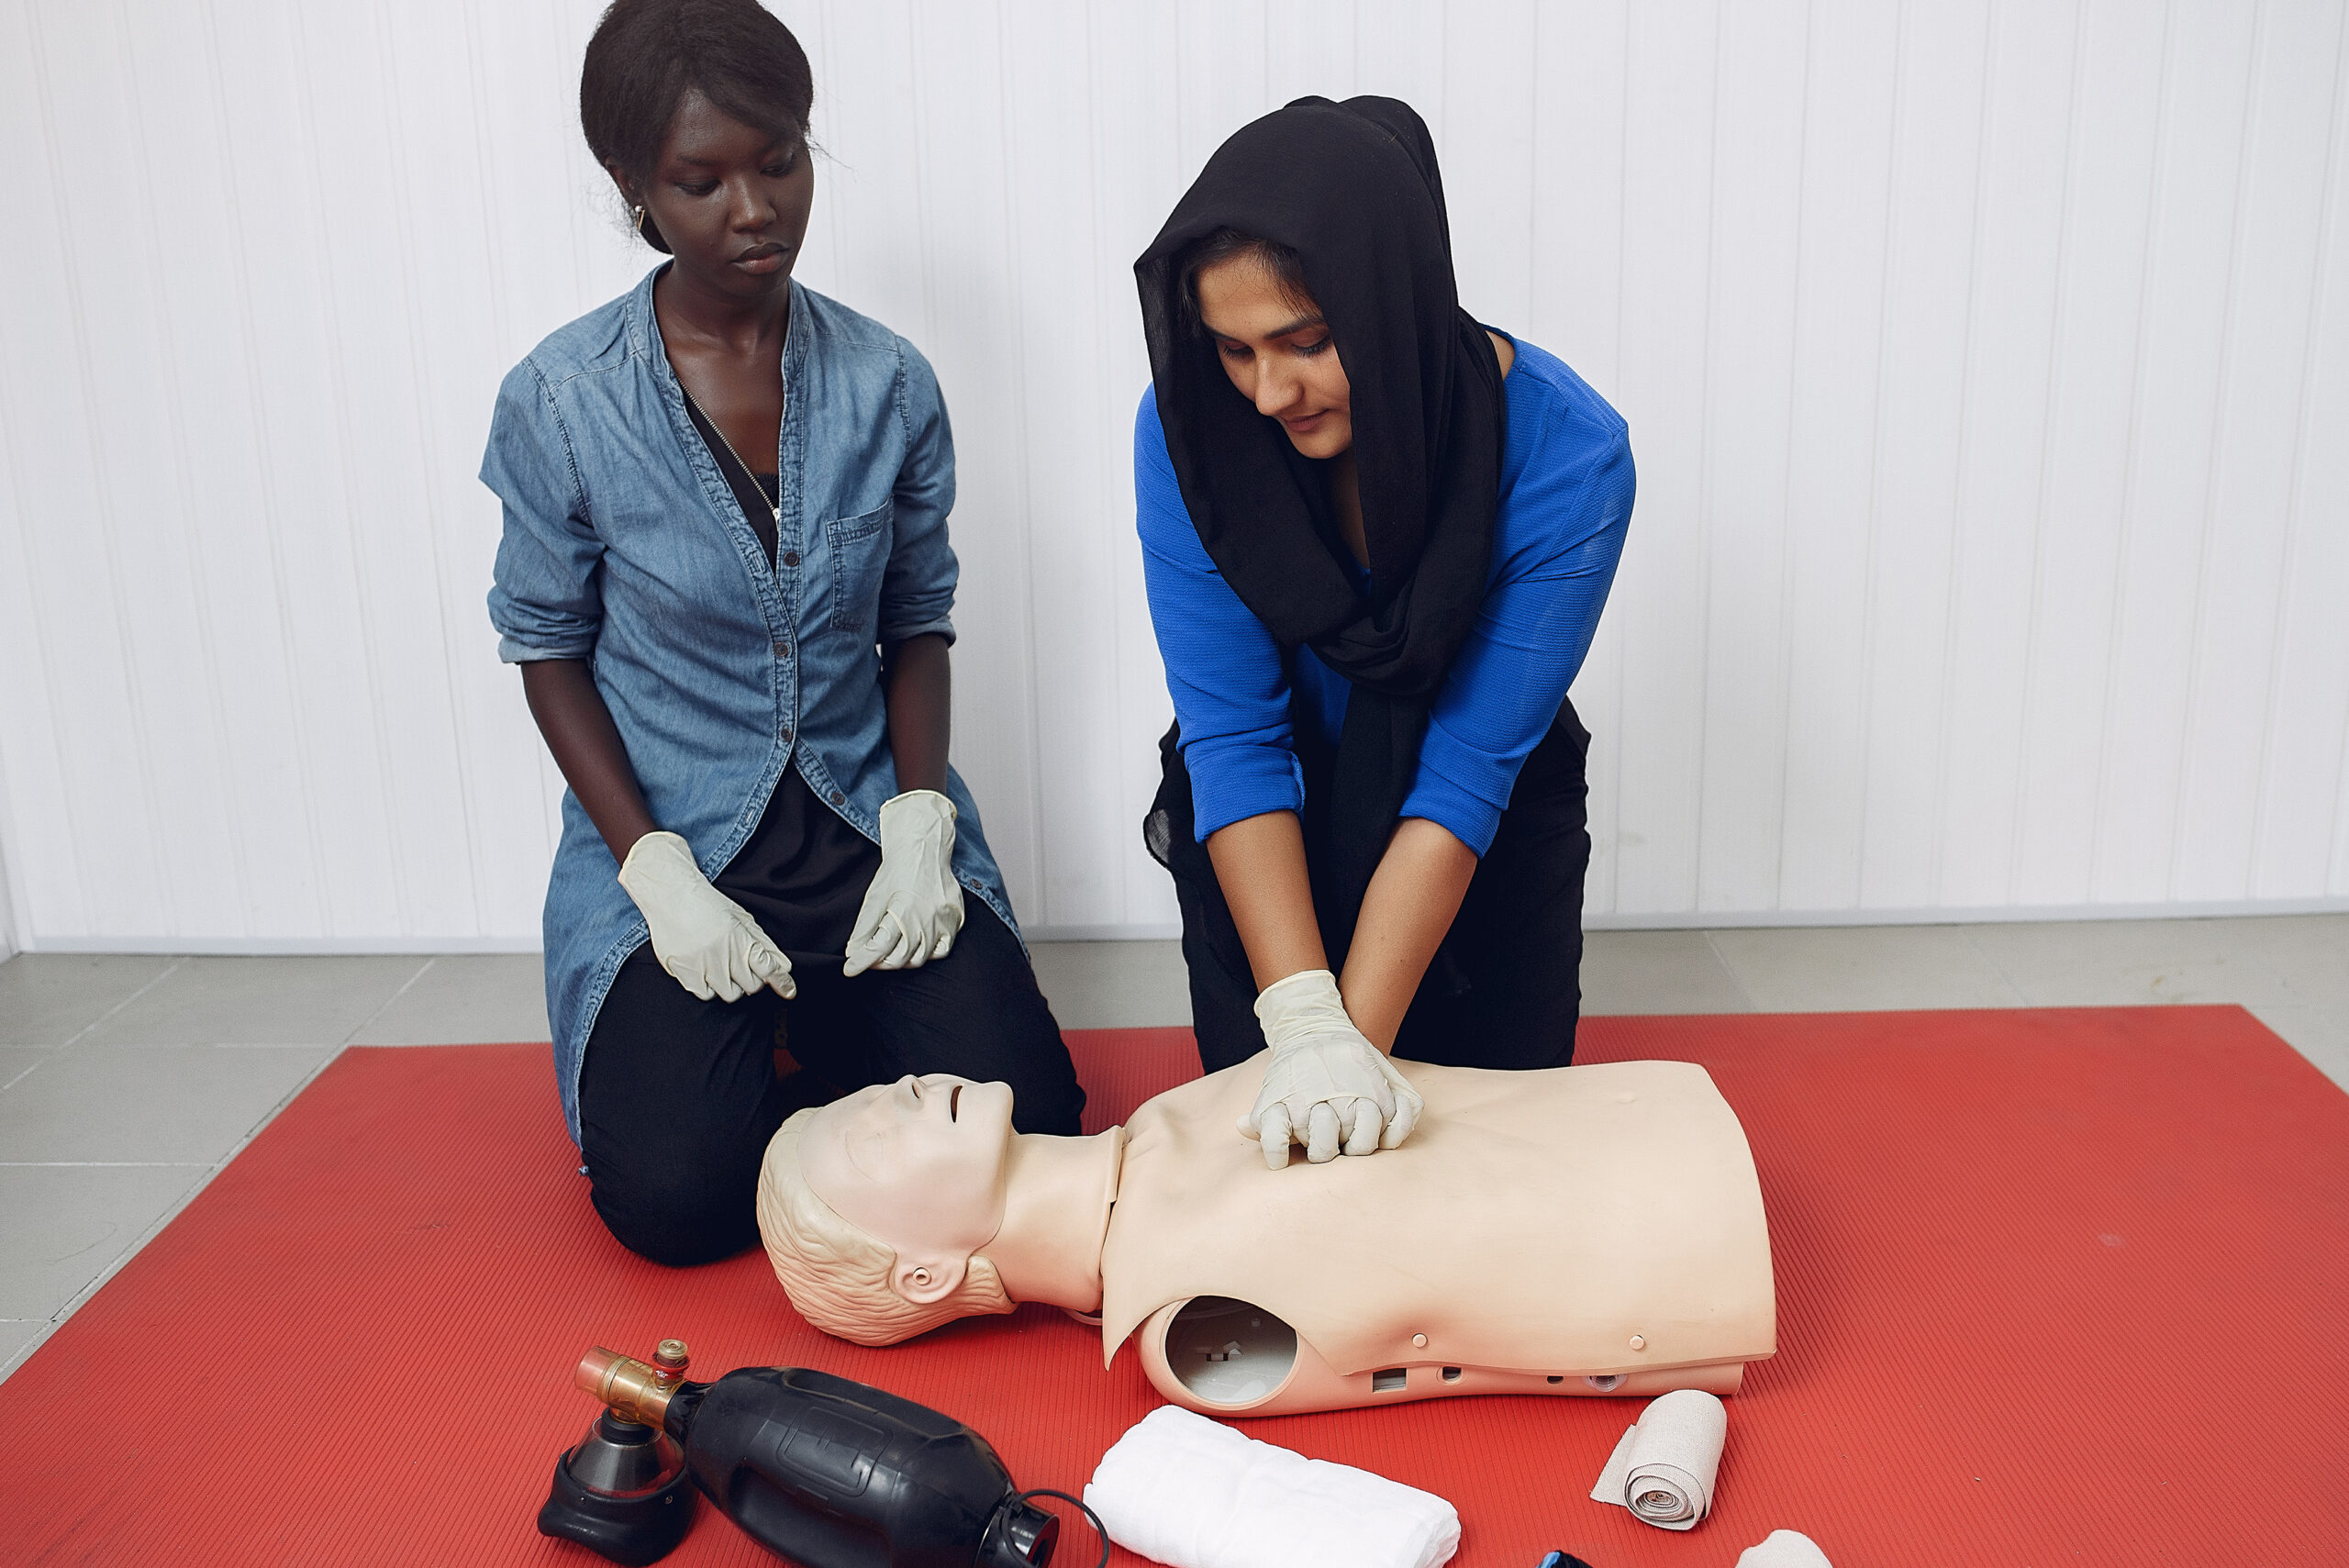 Woman learns to do artificial respiration on a mannequin - First Aid In The Workplace | Franklins Training Services